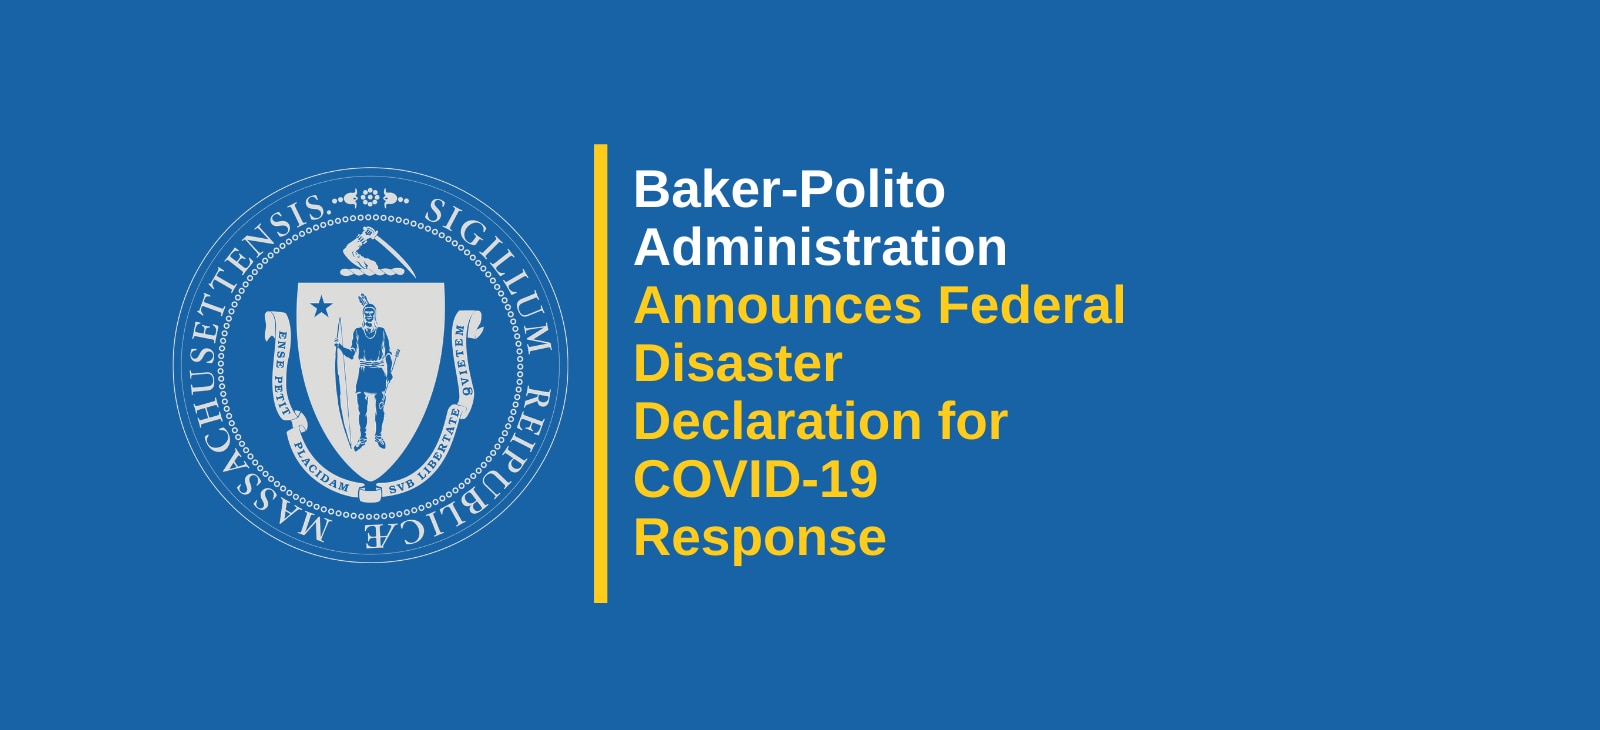 Baker-Polito Administration Announces Federal Disaster Declaration for COVID-19 Response